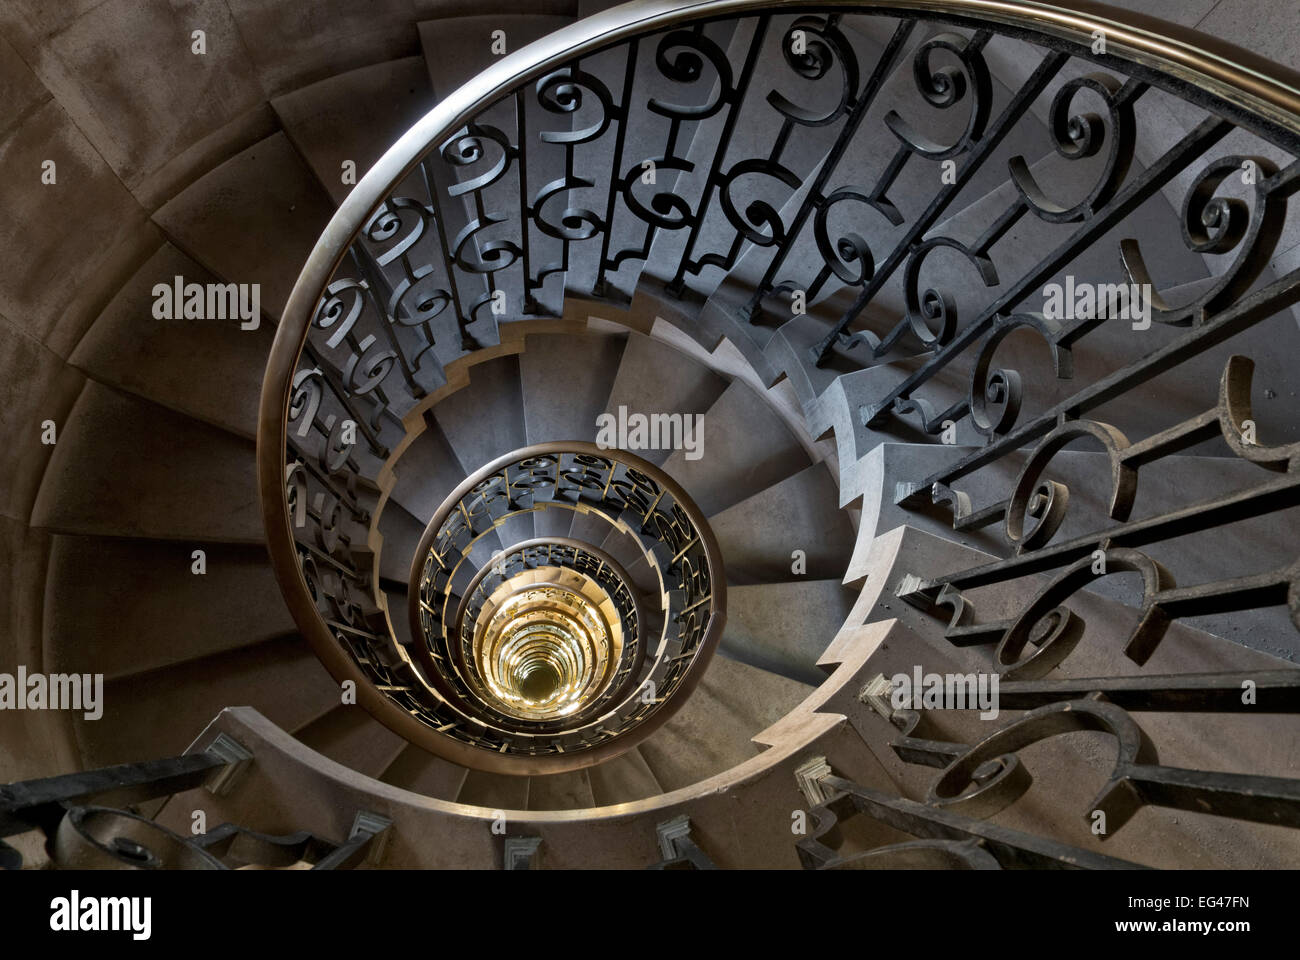 Spiral staircase at the old Midland Bank in the City of London Stock Photo